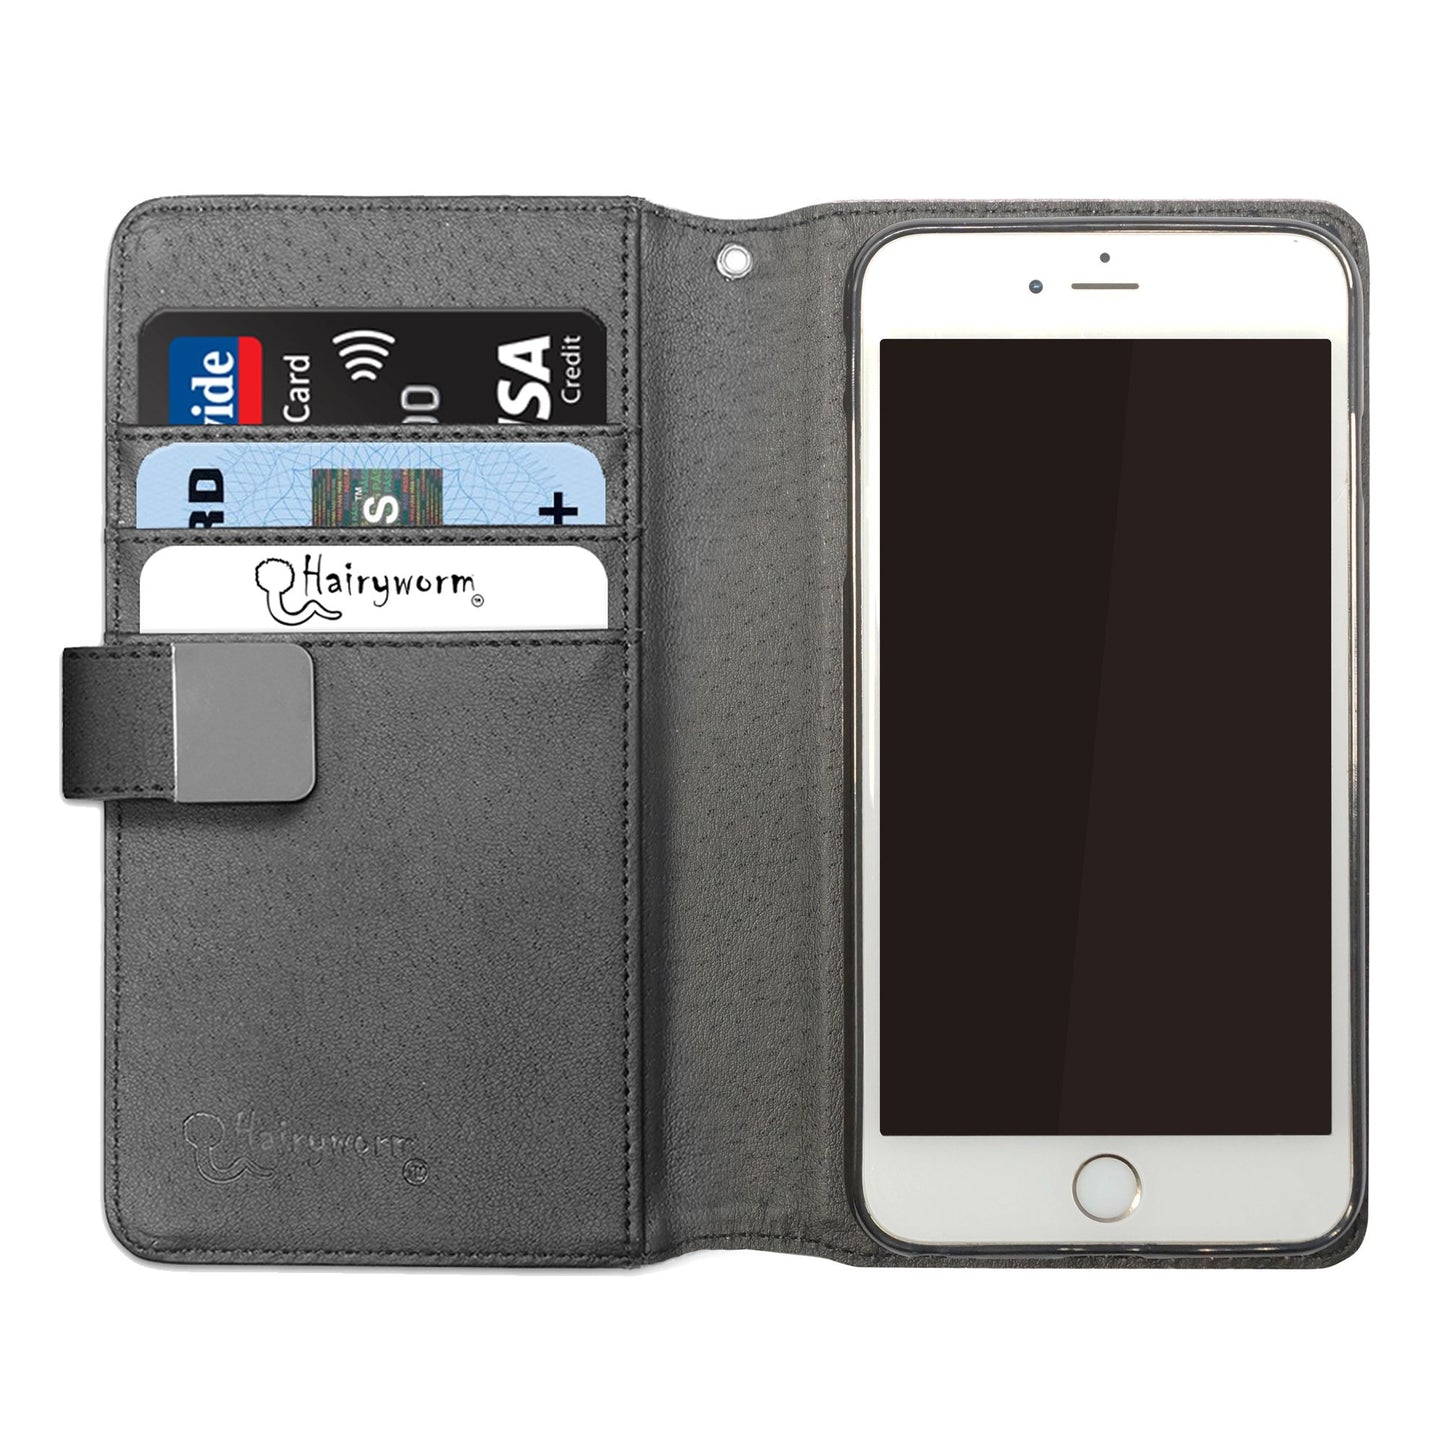 Personalised Apple iPhone Leather Wallet with Silver Floral Unicorn and Text on Dark Grey